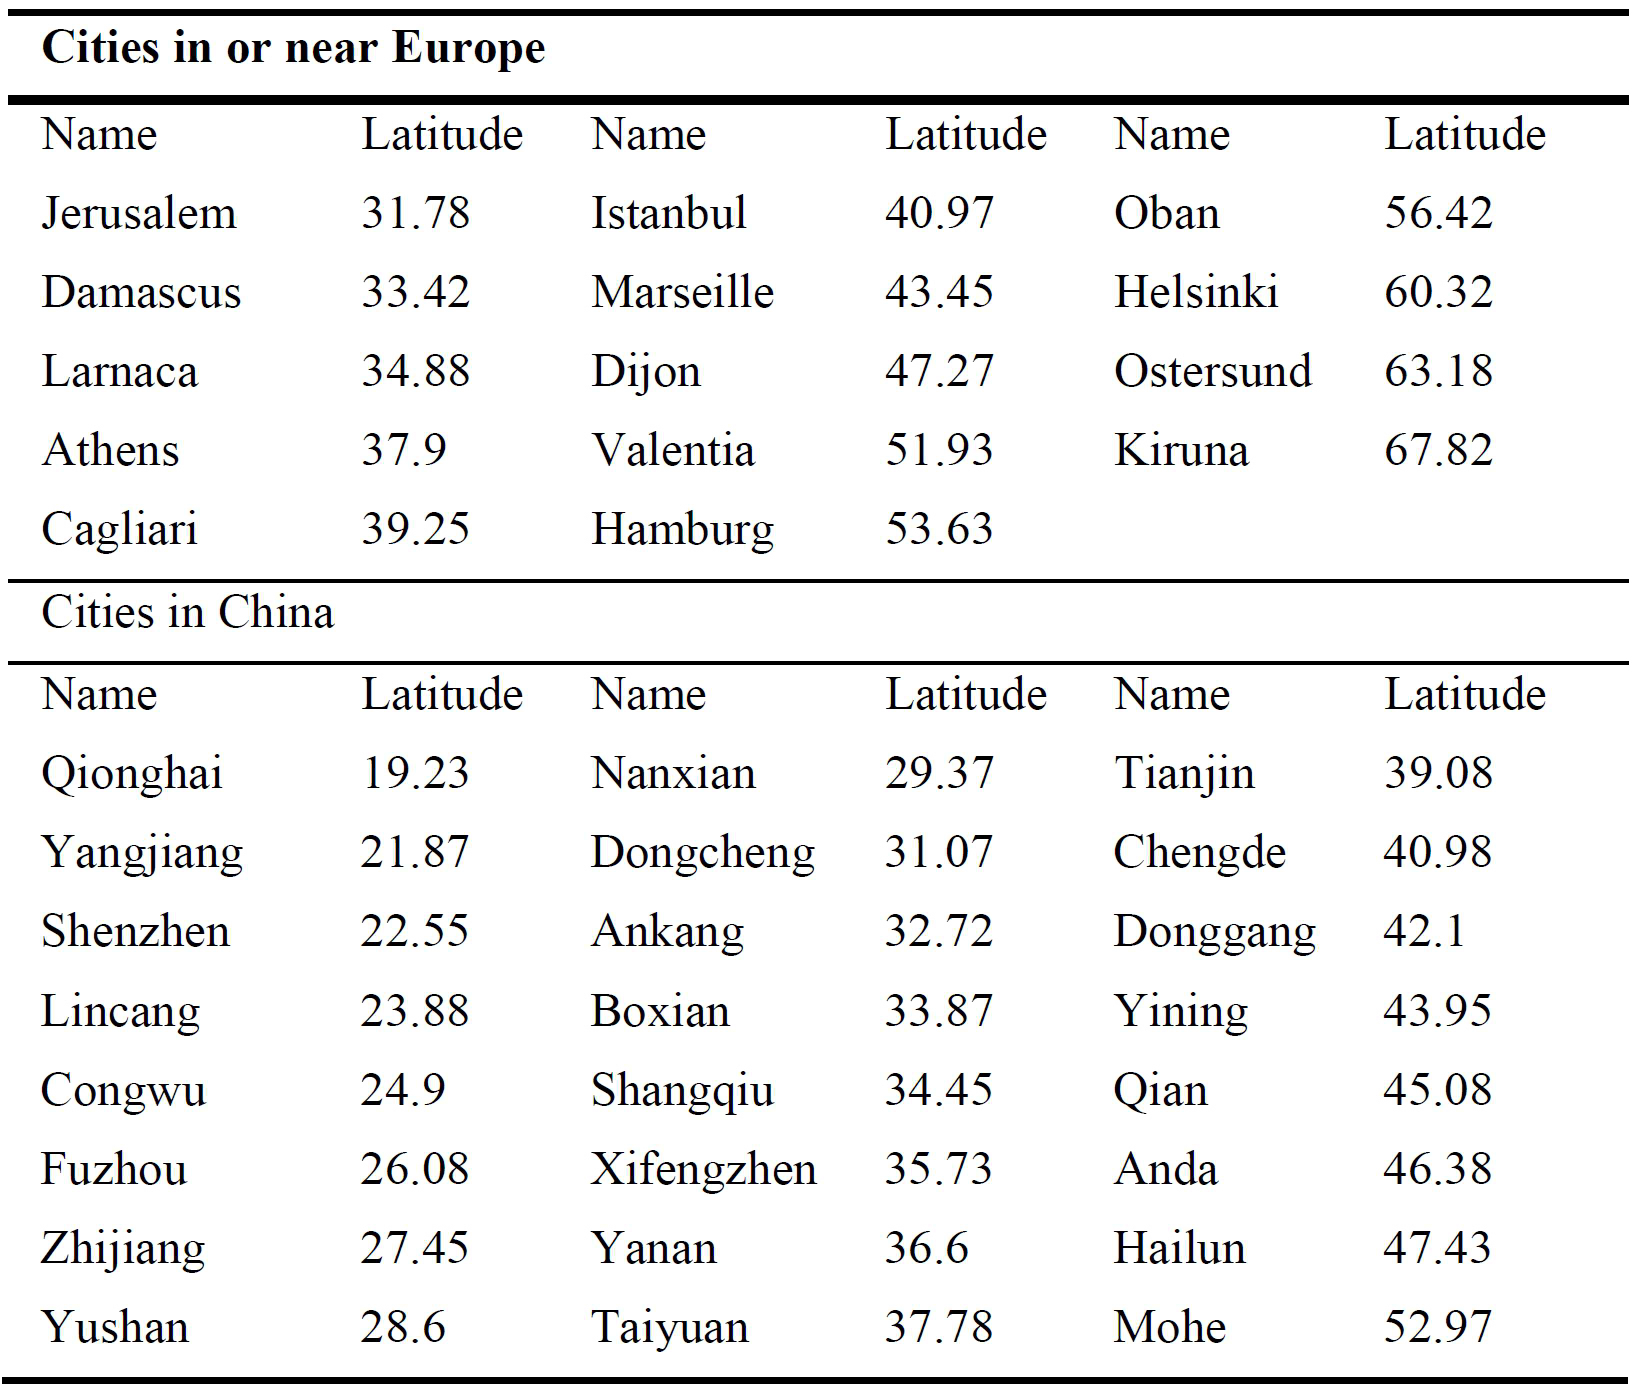 Selected cities and latitudes.